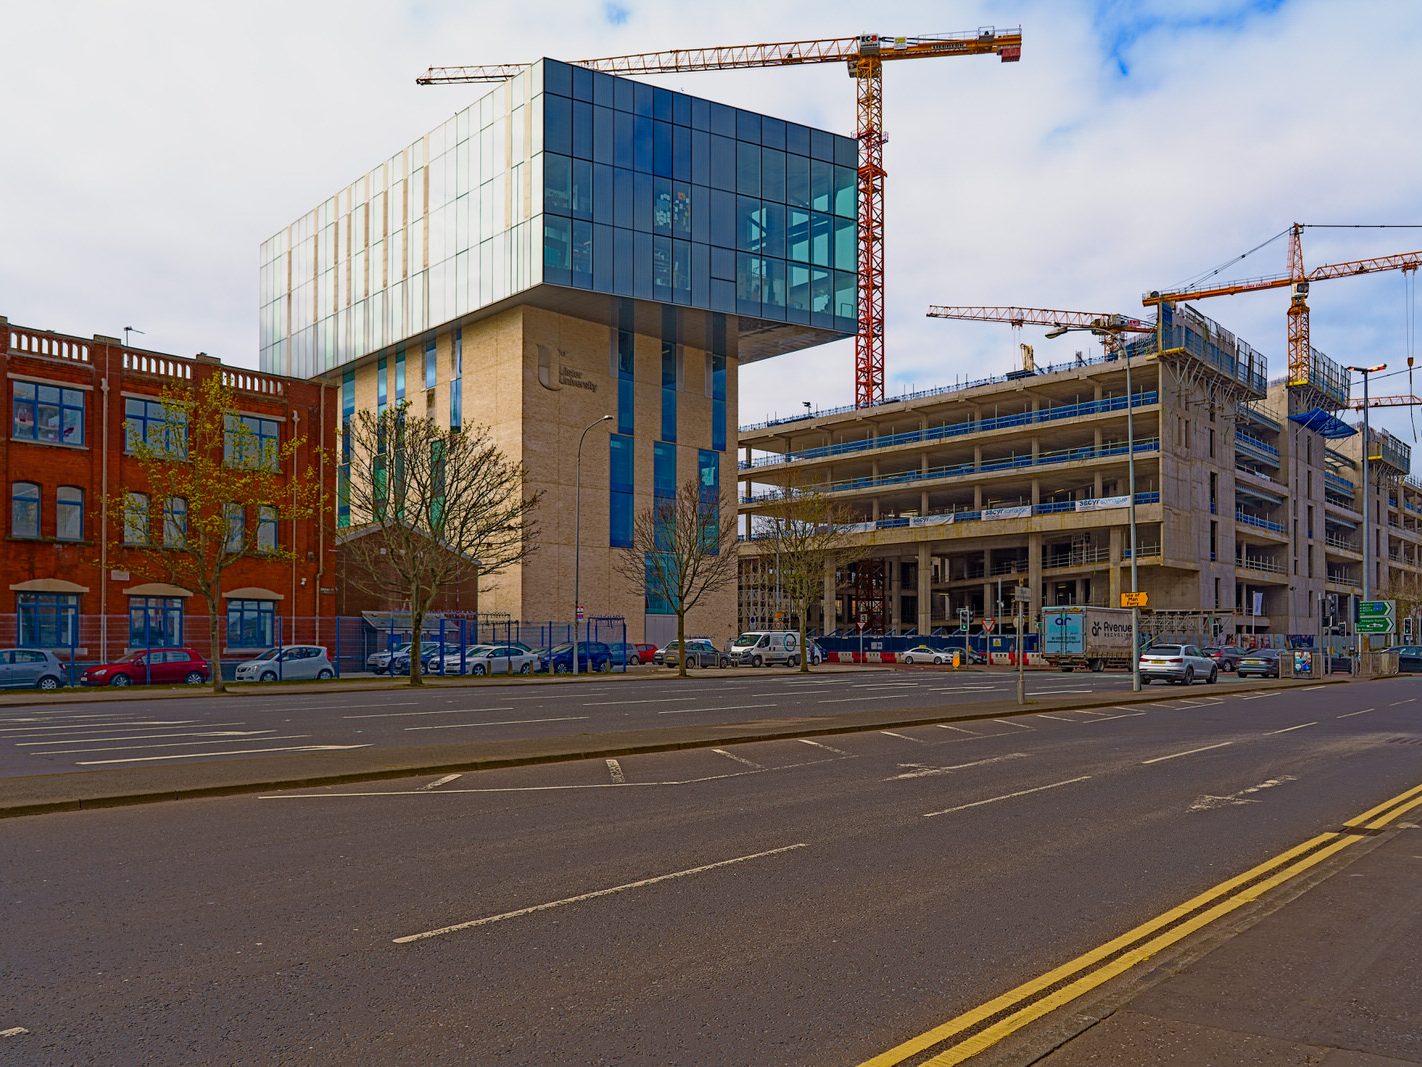 NEW ULSTER UNIVERSITY CAMPUS IN BELFAST [WAS VERY MUCH A WORK IN PROGRESS IN MARCH 2019]-224617-1